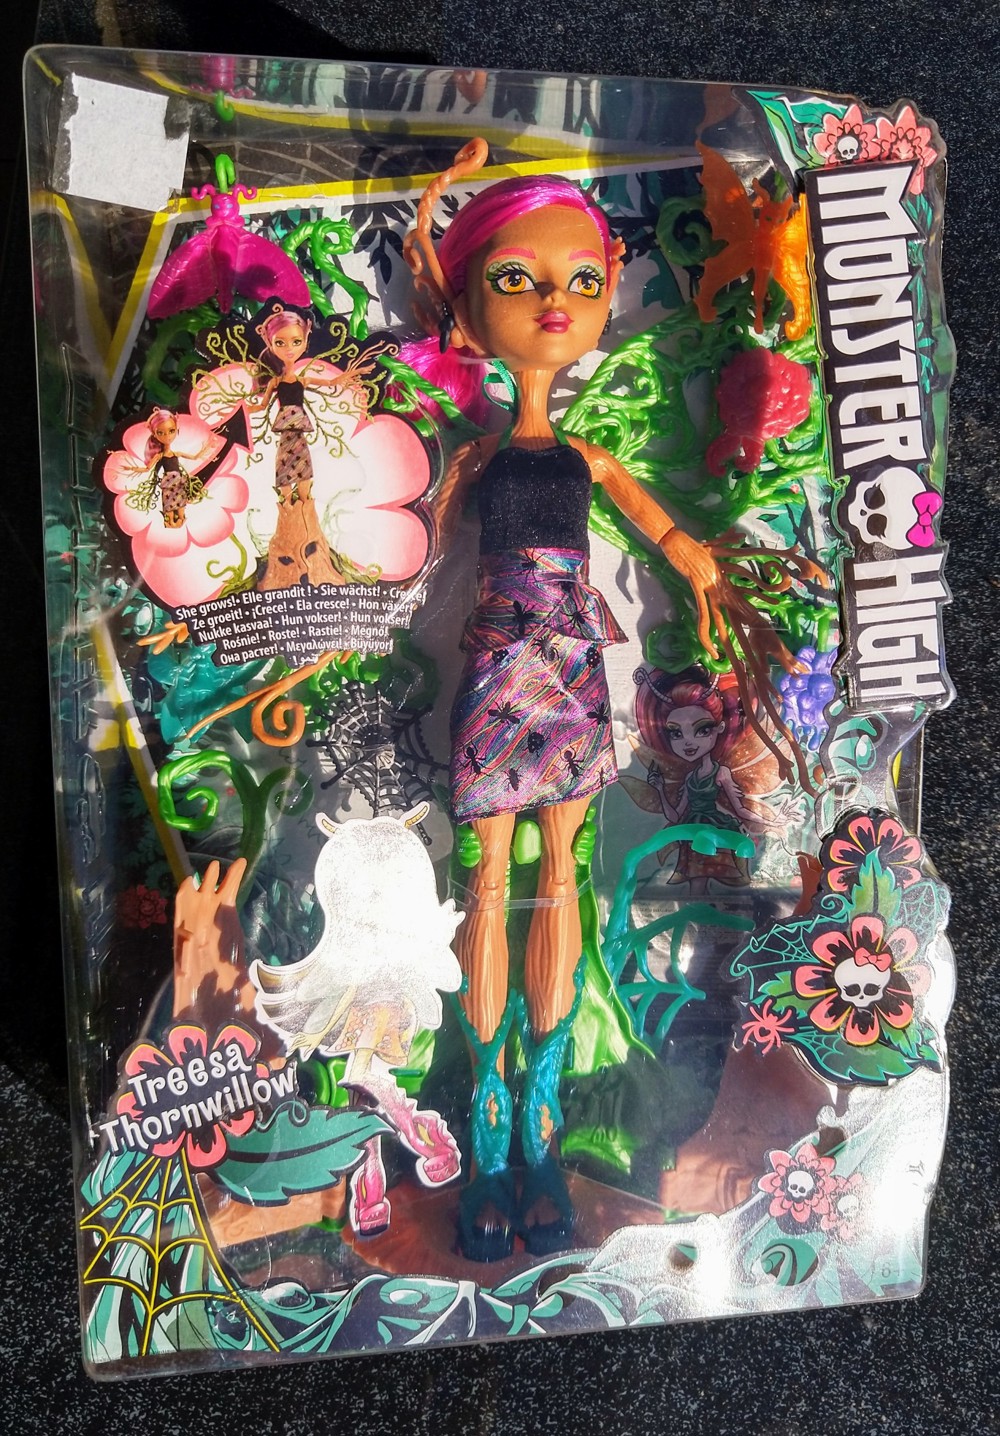 Monster High Puppe Barbie "Treesa Thornwillow"